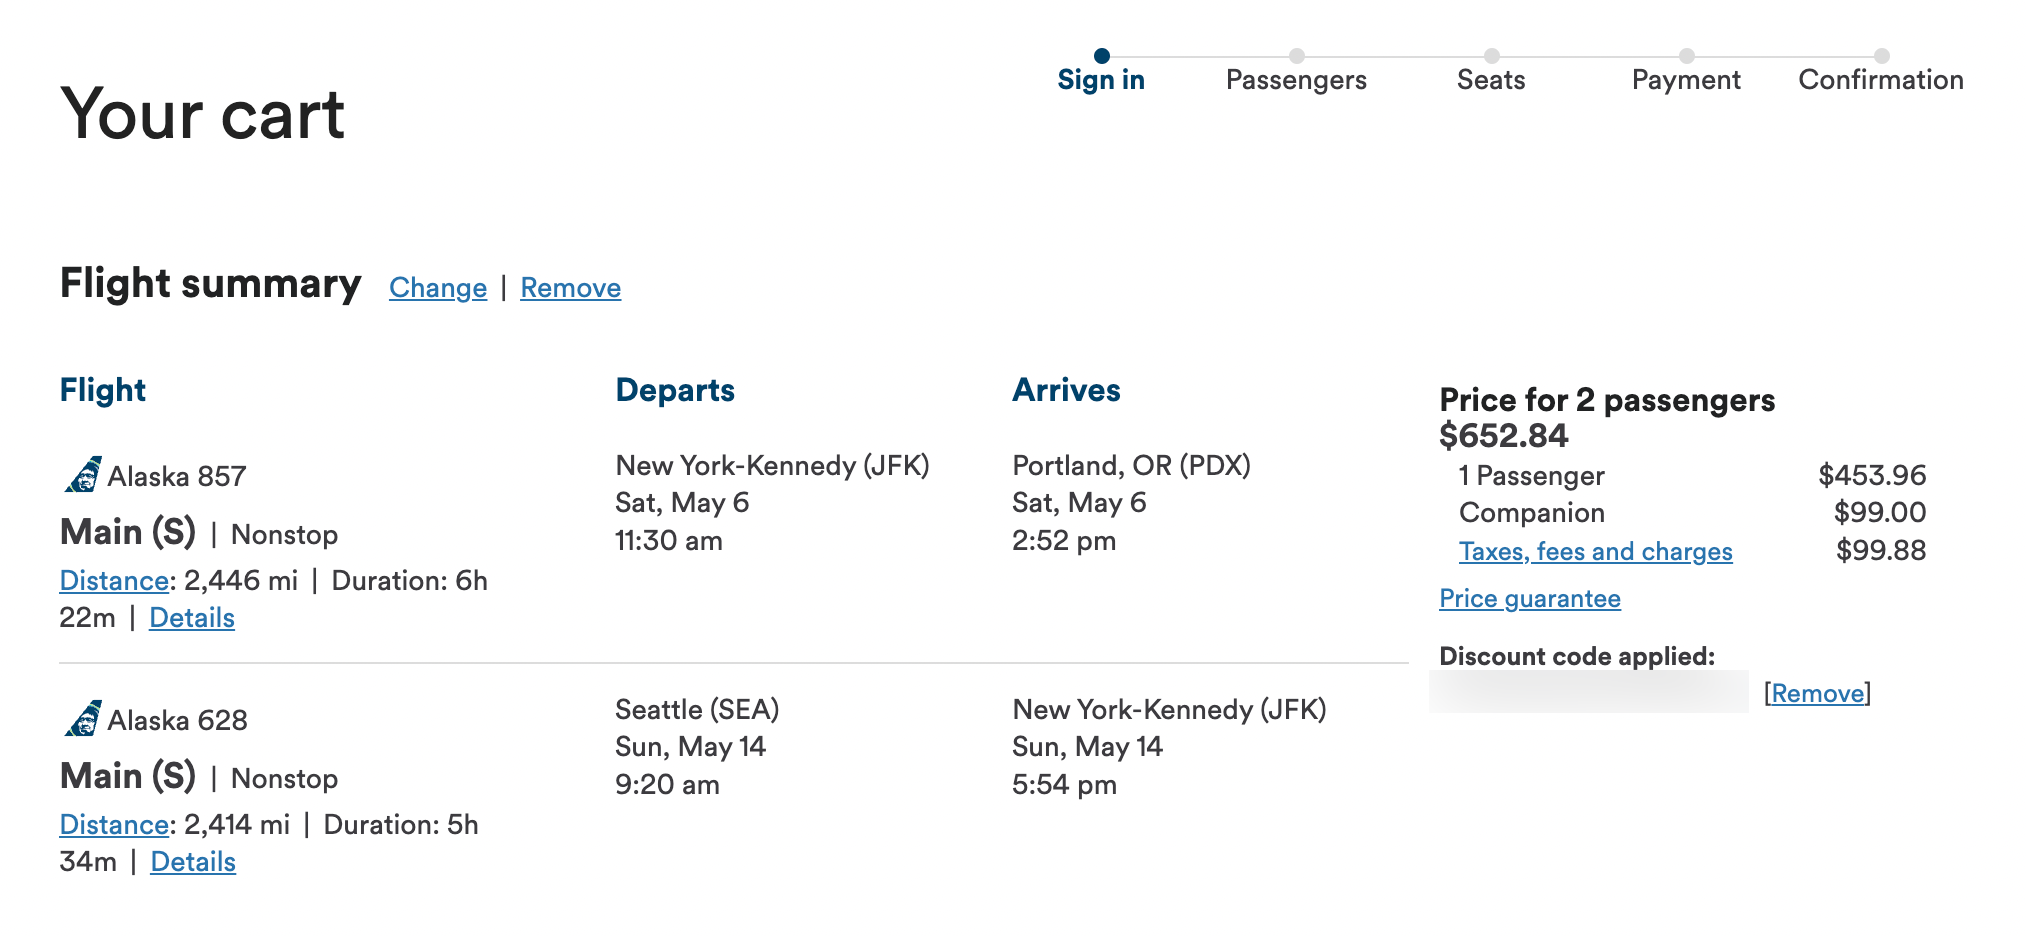 An open jaw on Alaska Airlines booked with the companion fare